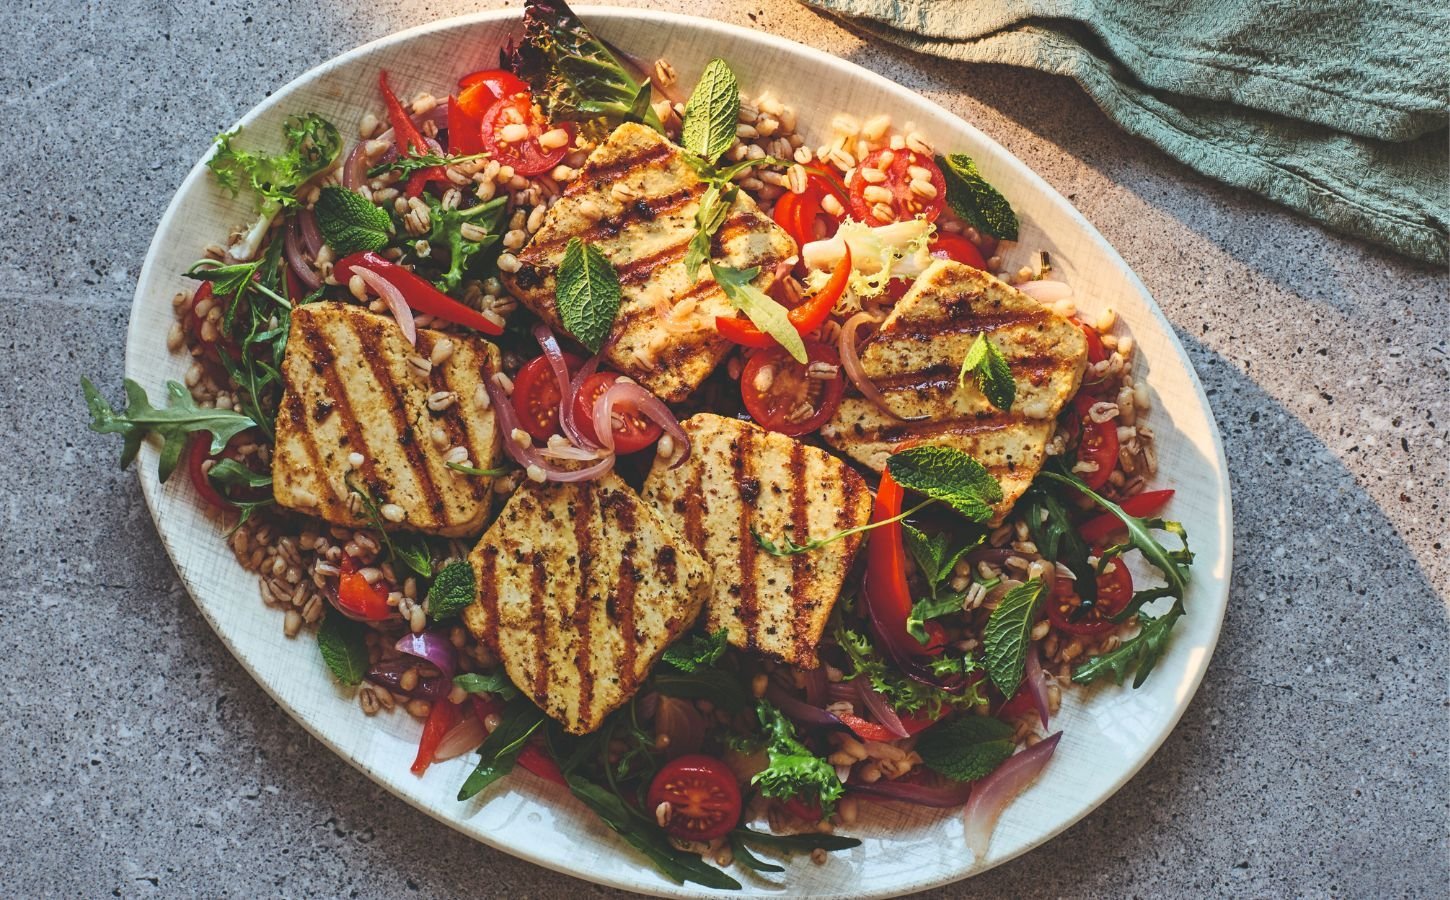 a picture of a vegan barley salad made with tofu 'halloumi' and peppers, tomato, and seasonings